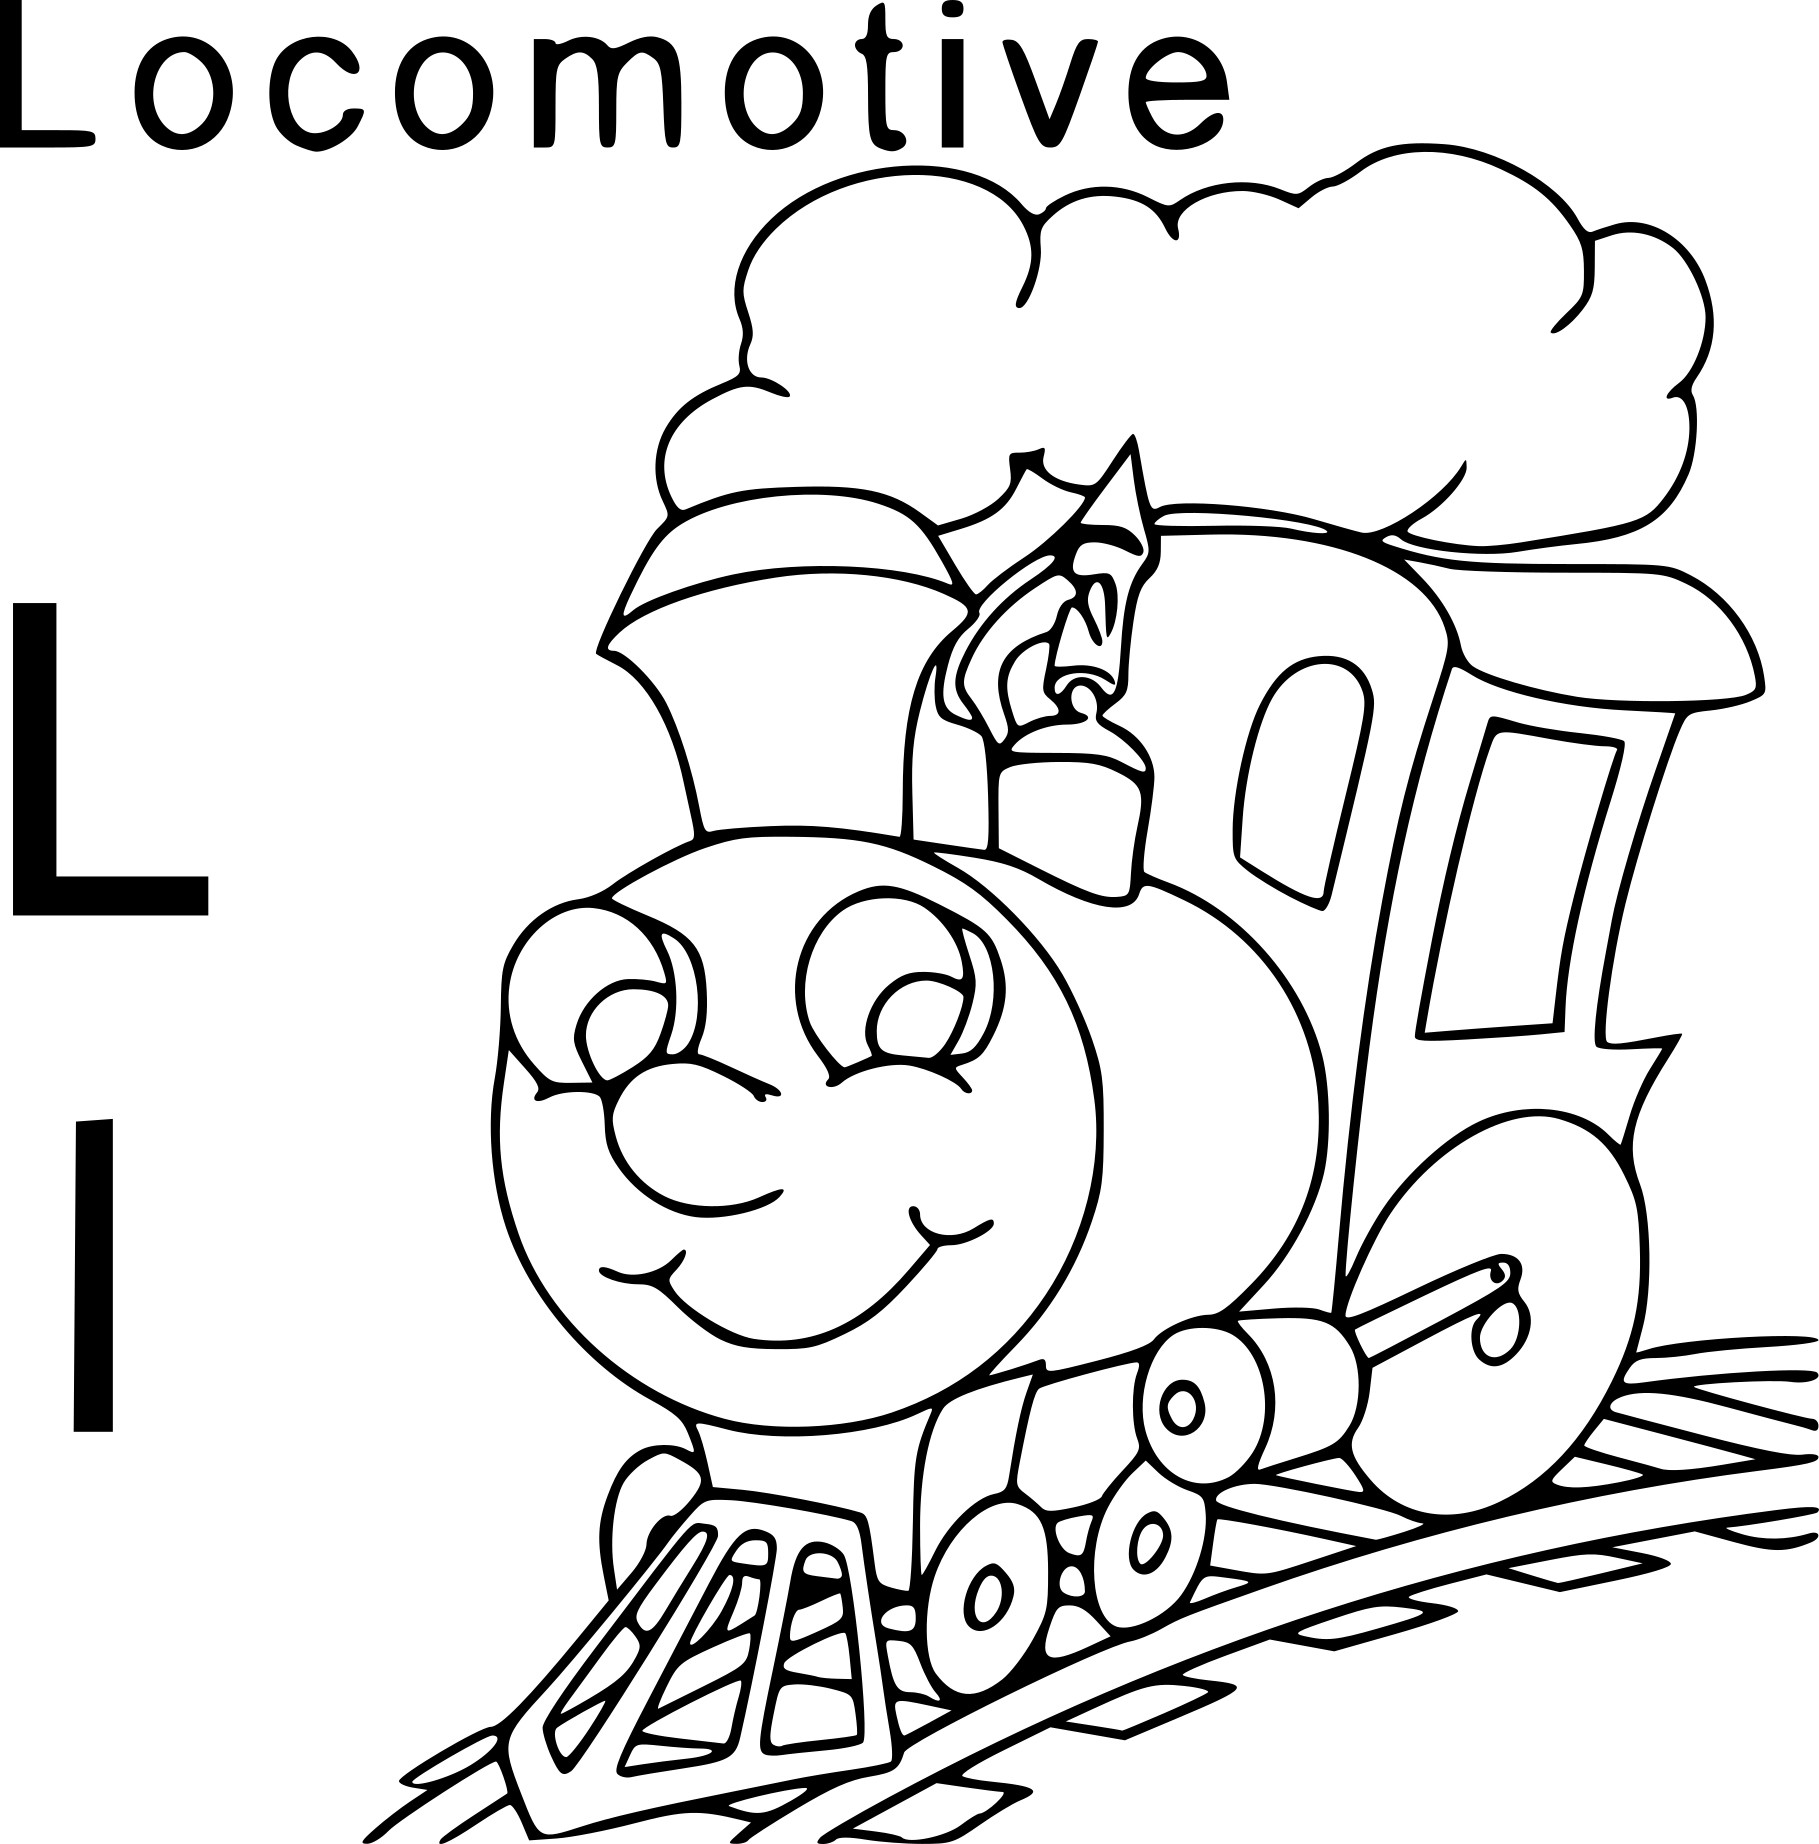 L For Locomotive coloring page